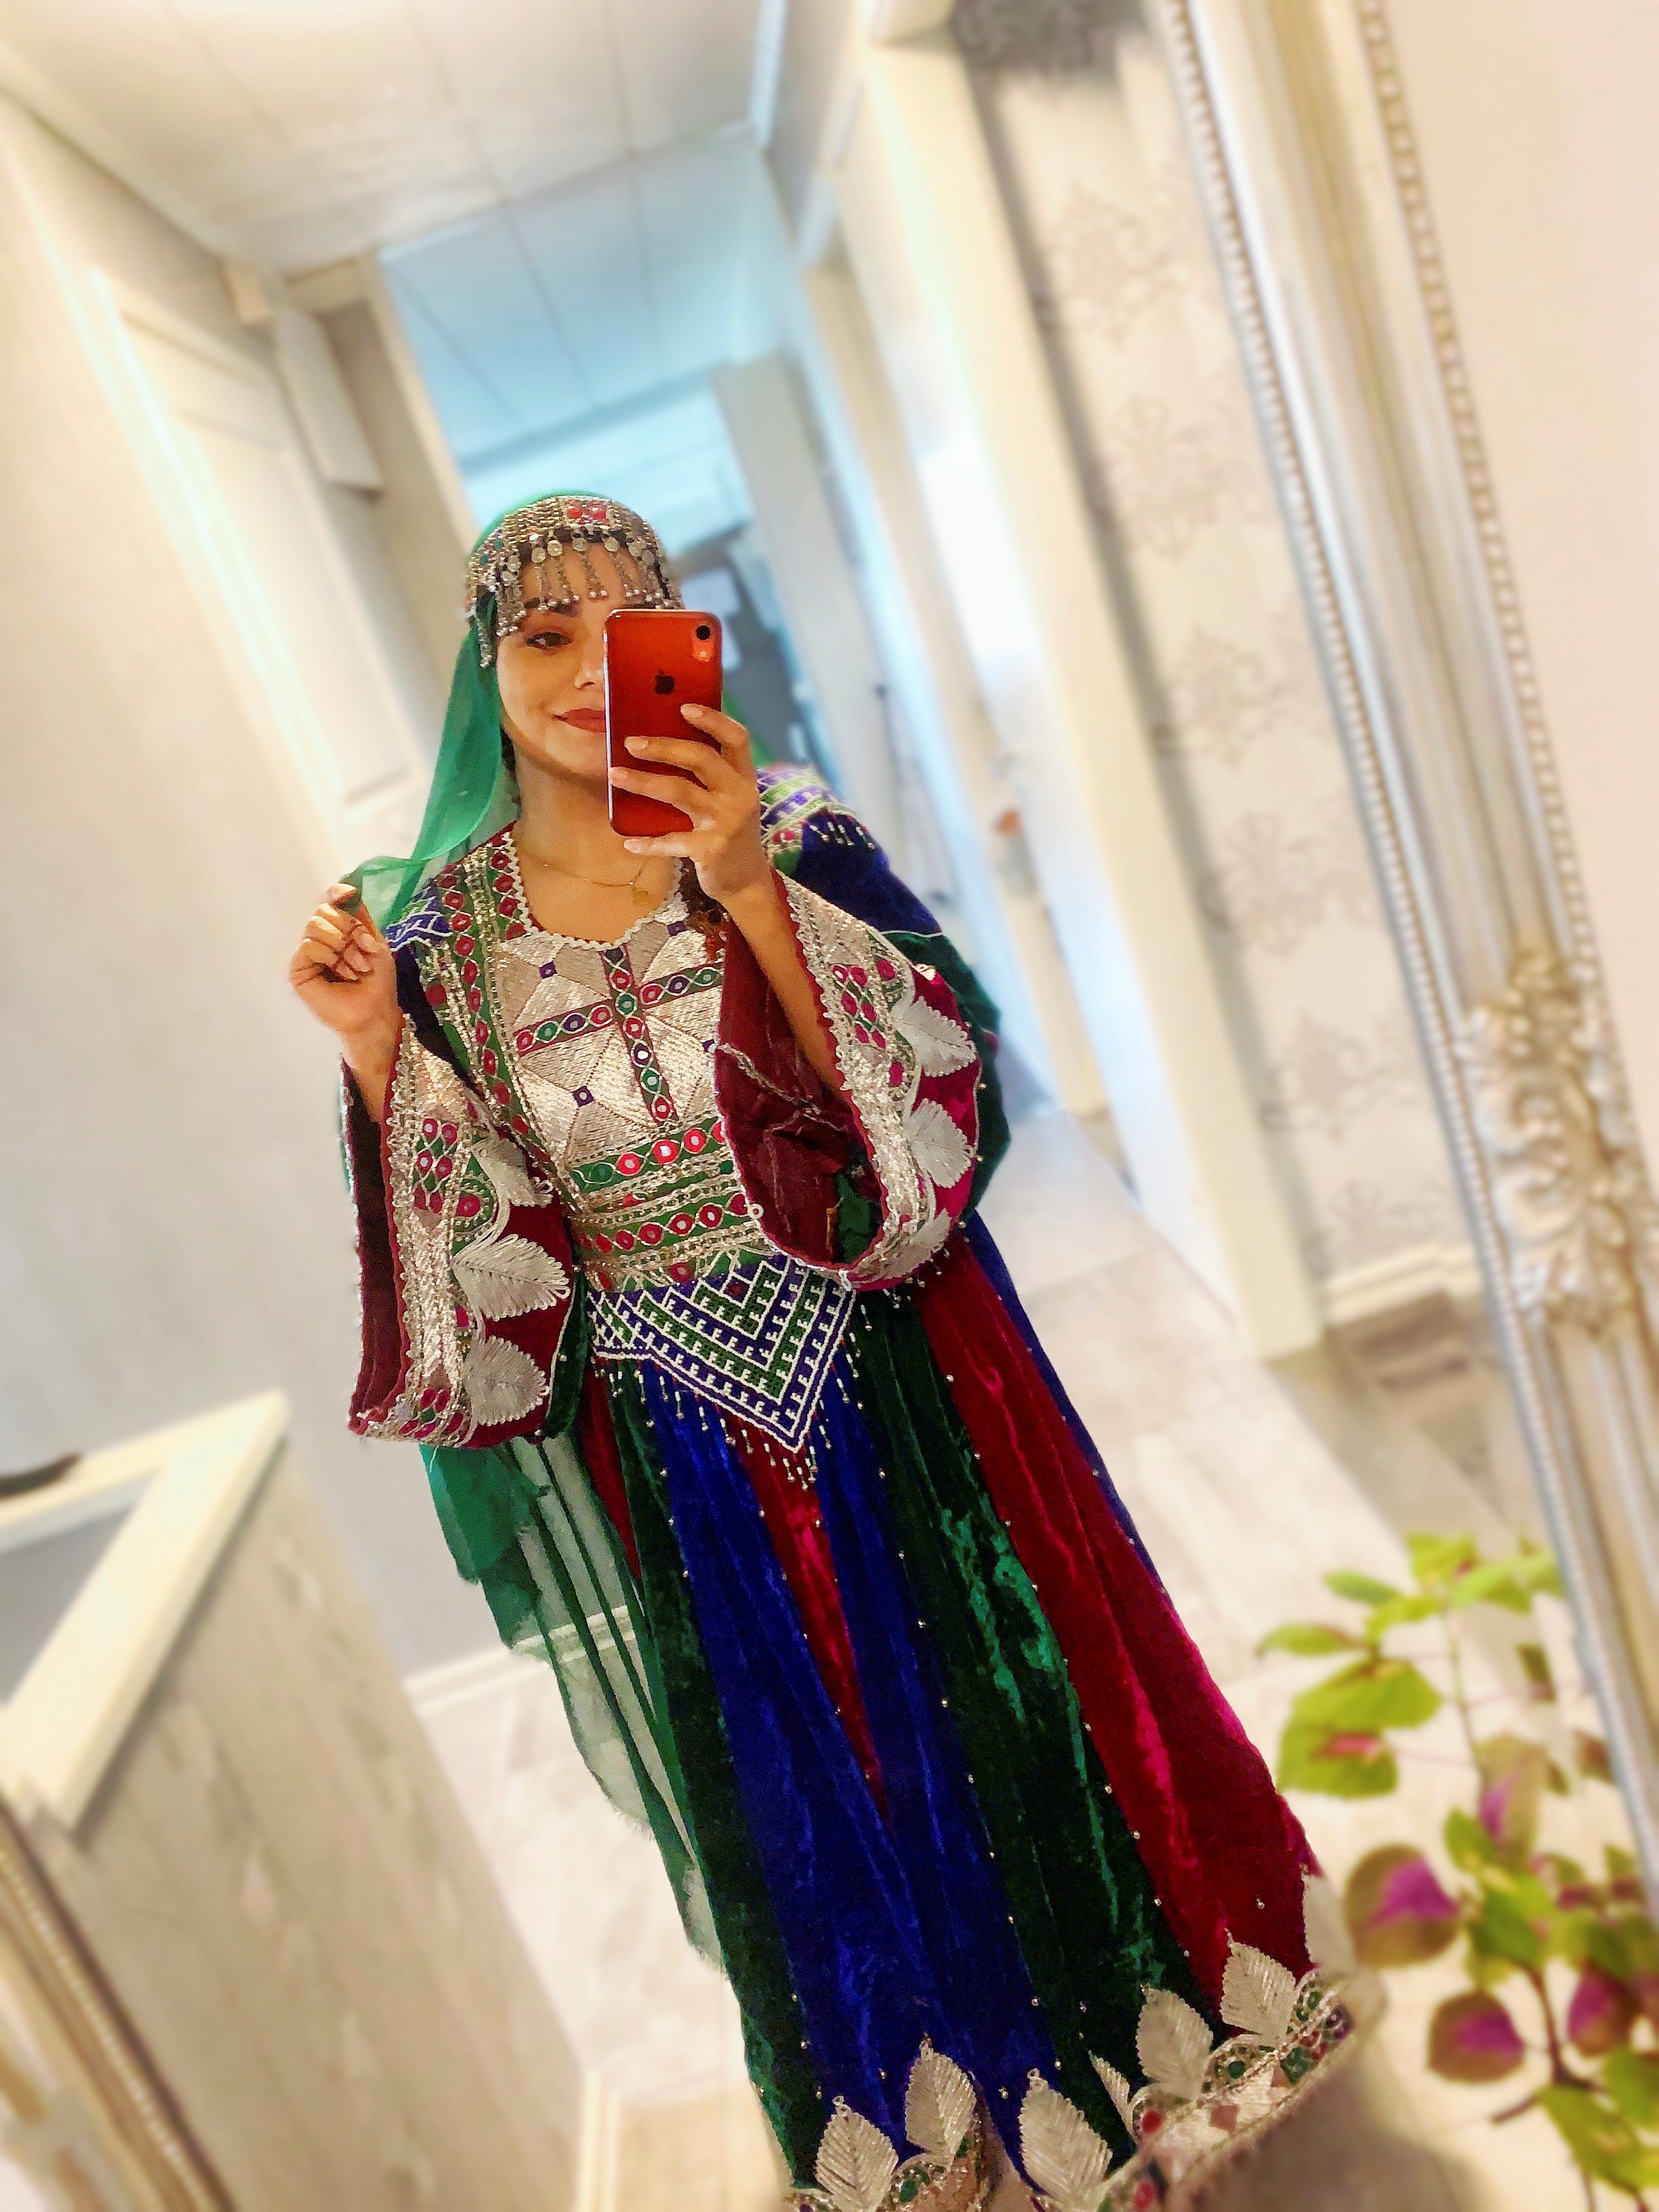 ‘This is how we dress’: Afghan women overseas pose in colorful attire